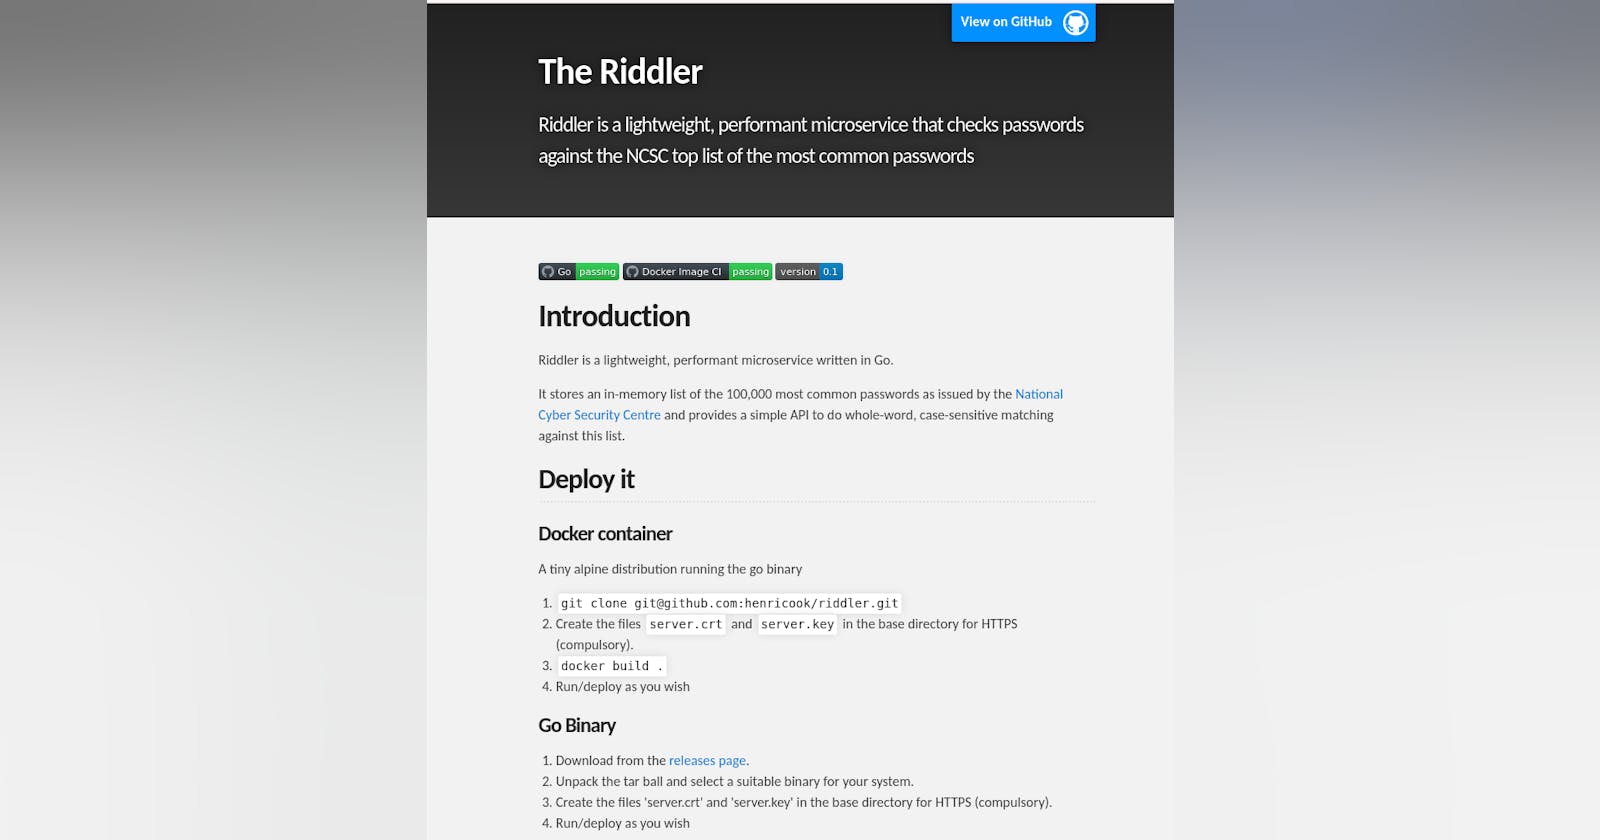 The Riddler: Microservice for checking passwords against the NCSC top list